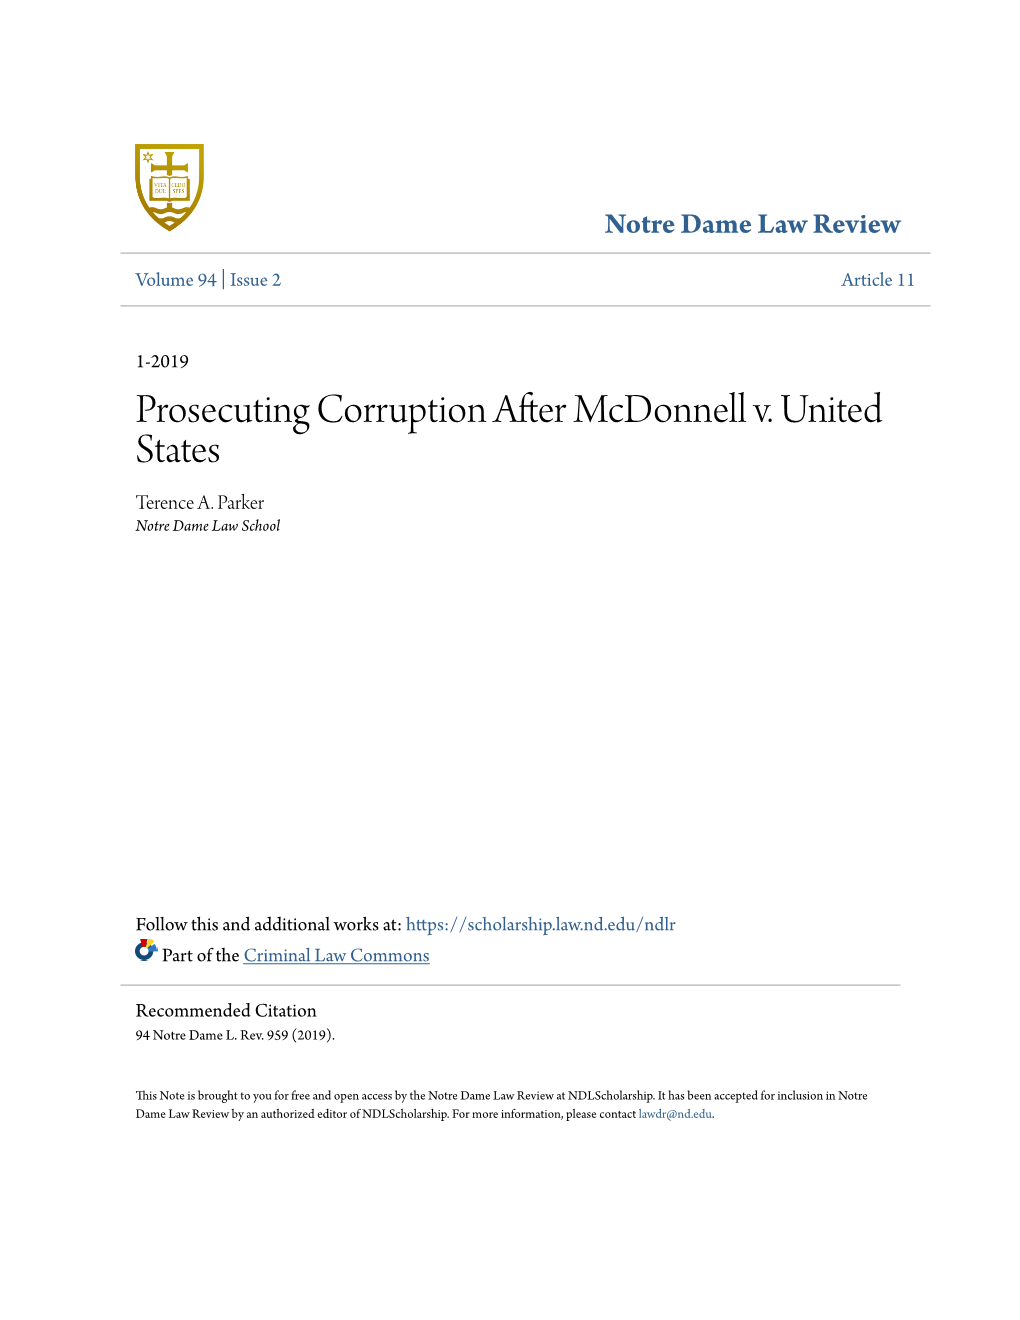 Prosecuting Corruption After Mcdonnell V. United States Terence A